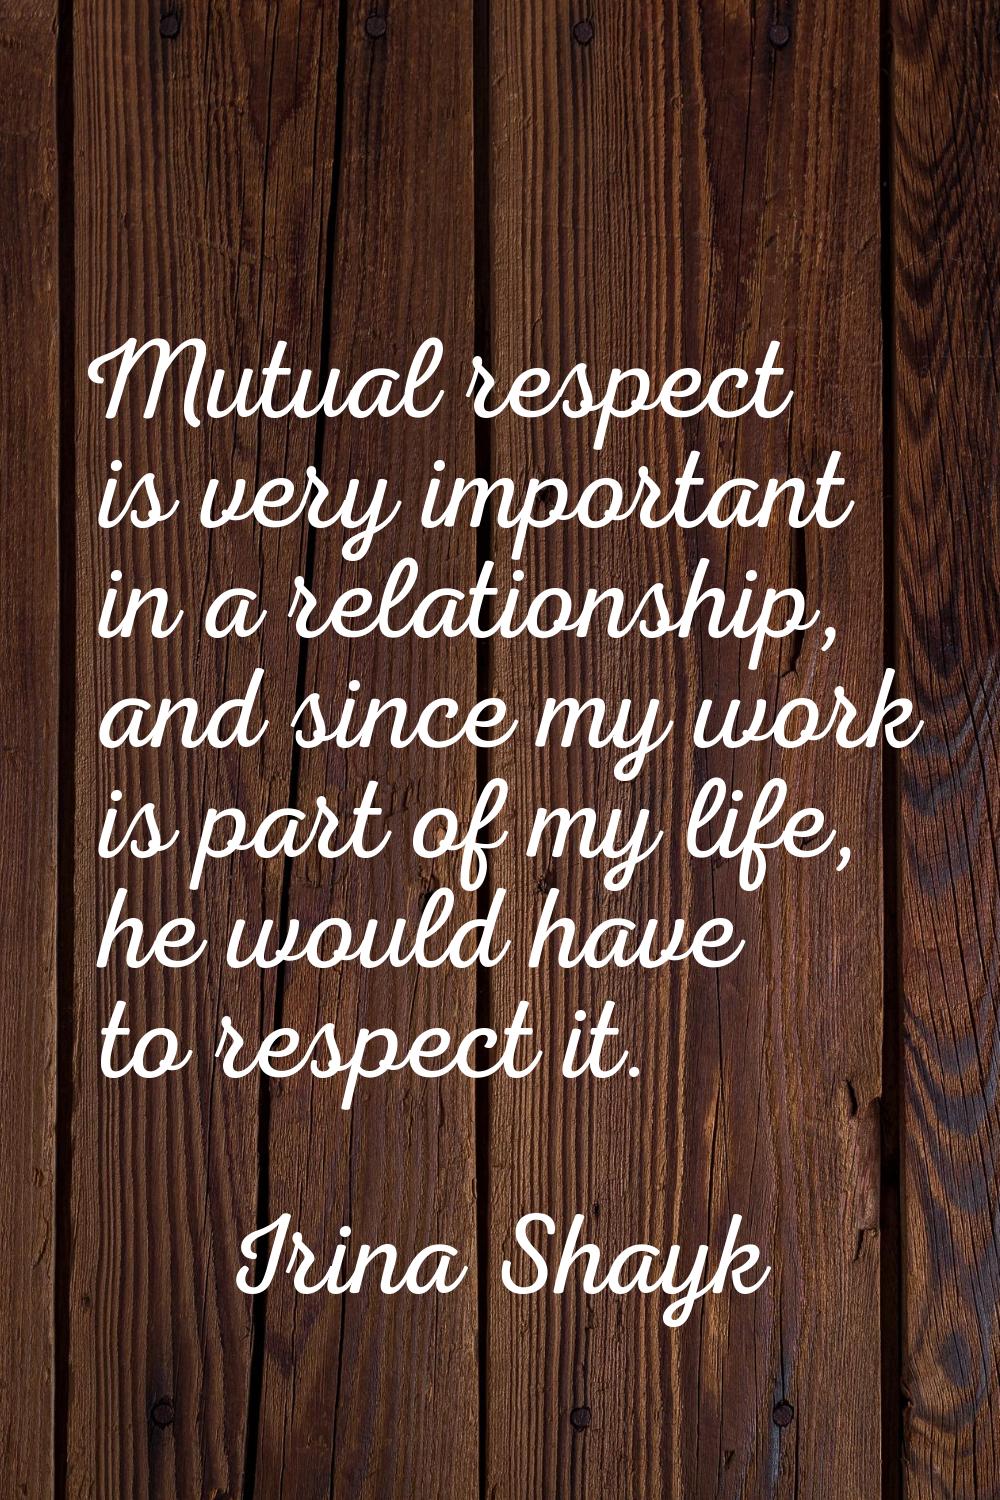 Mutual respect is very important in a relationship, and since my work is part of my life, he would 